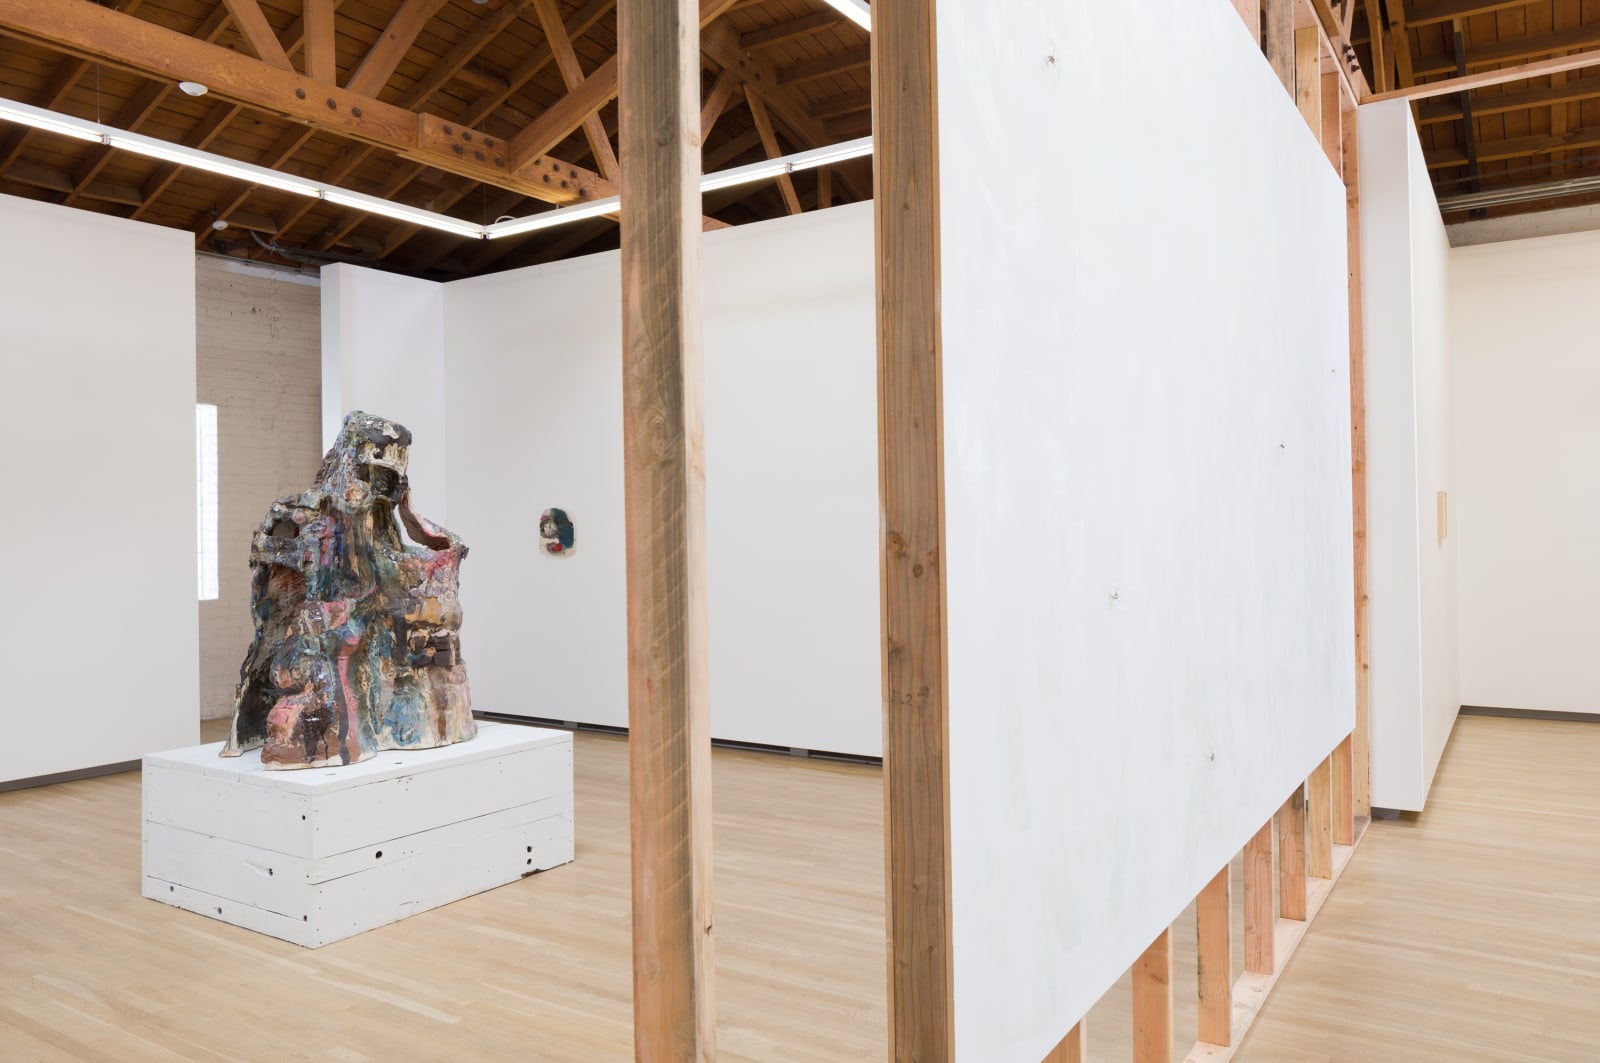 The Project Room, 2019, Shulamit Nazarian, Los Angeles, installation view